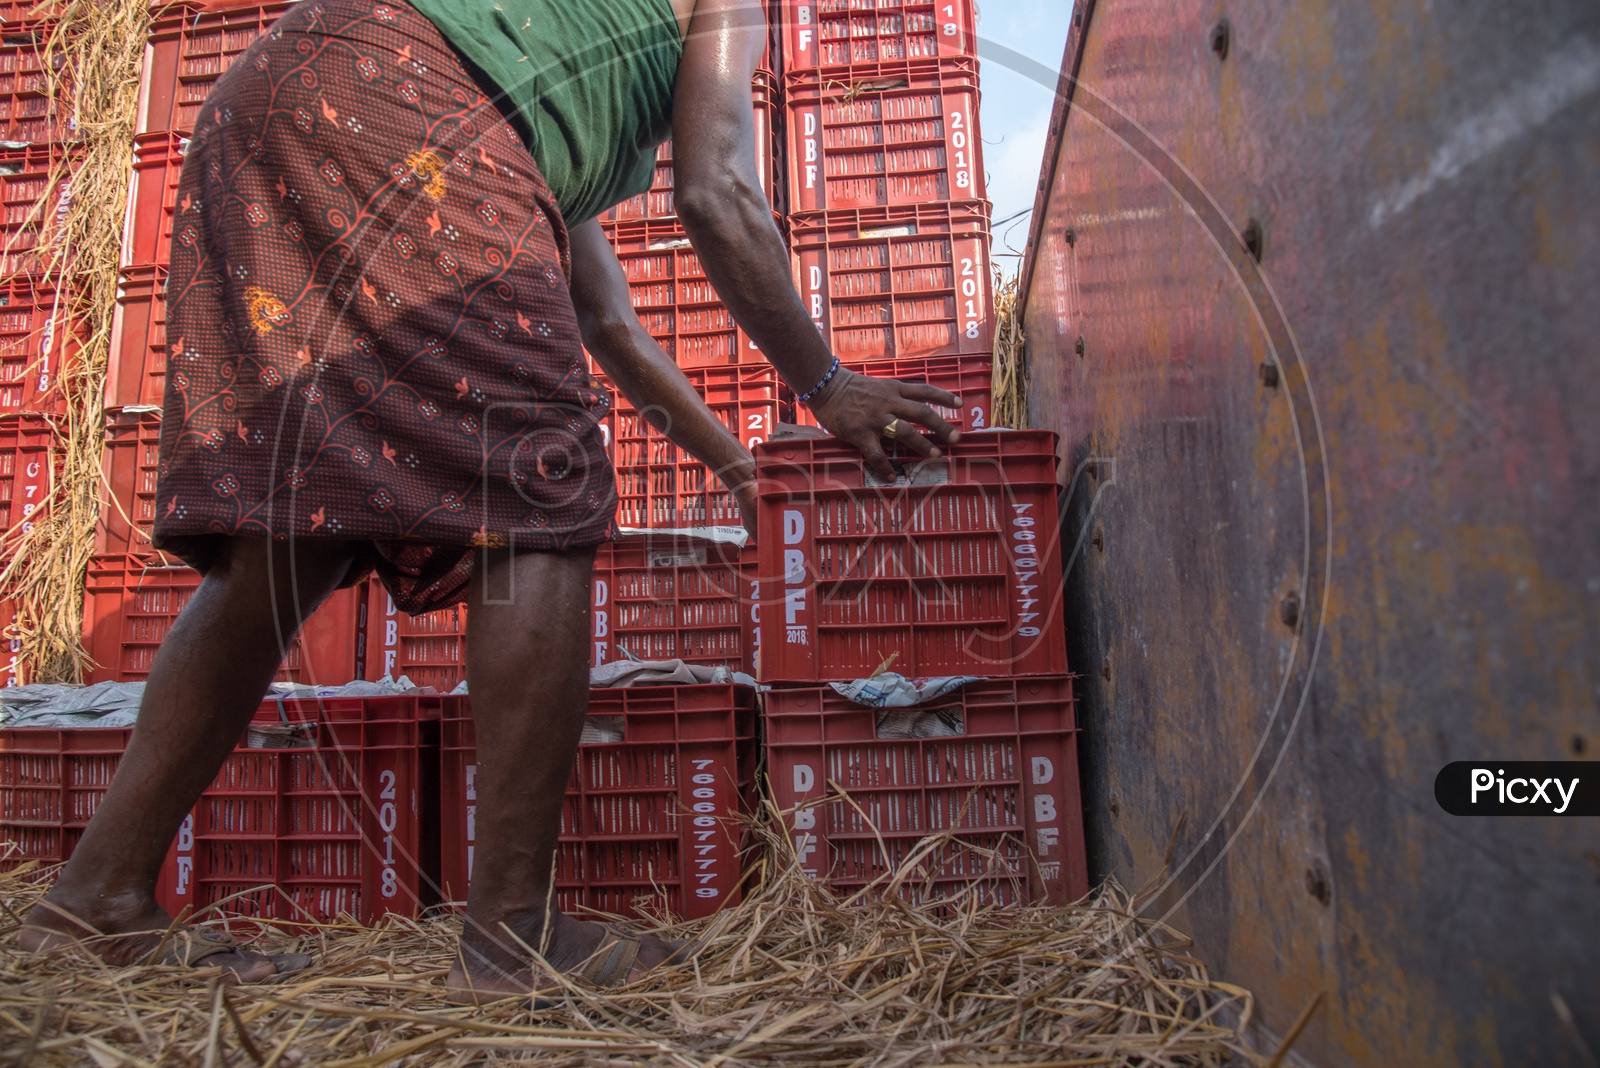 Mangoes stuffed in baskets are being loaded in a Lorry for Export to States across India.